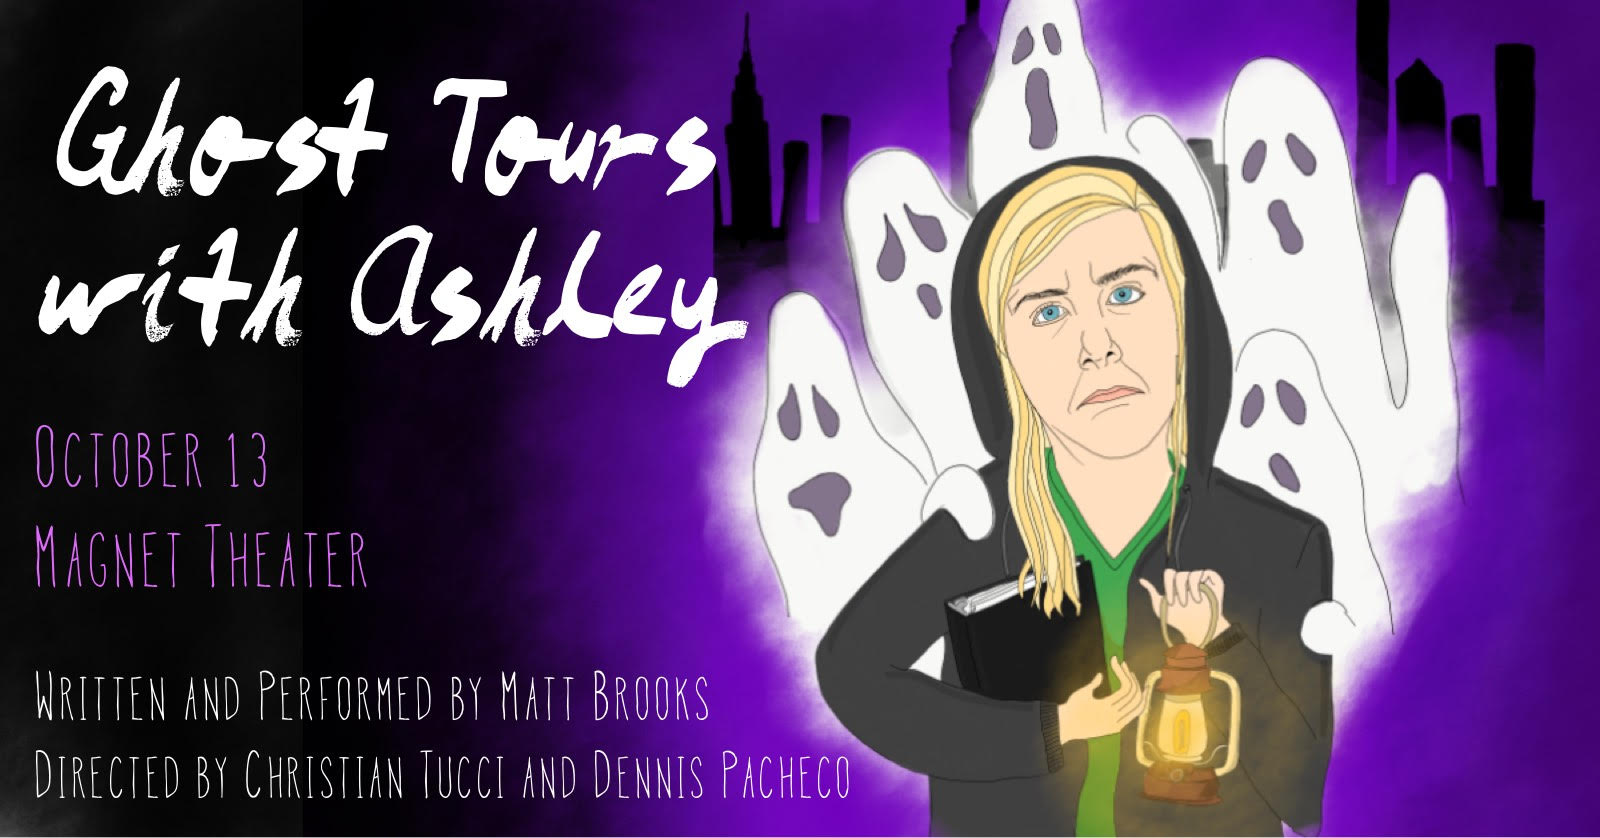 Ghost Tour Guides with Ashley